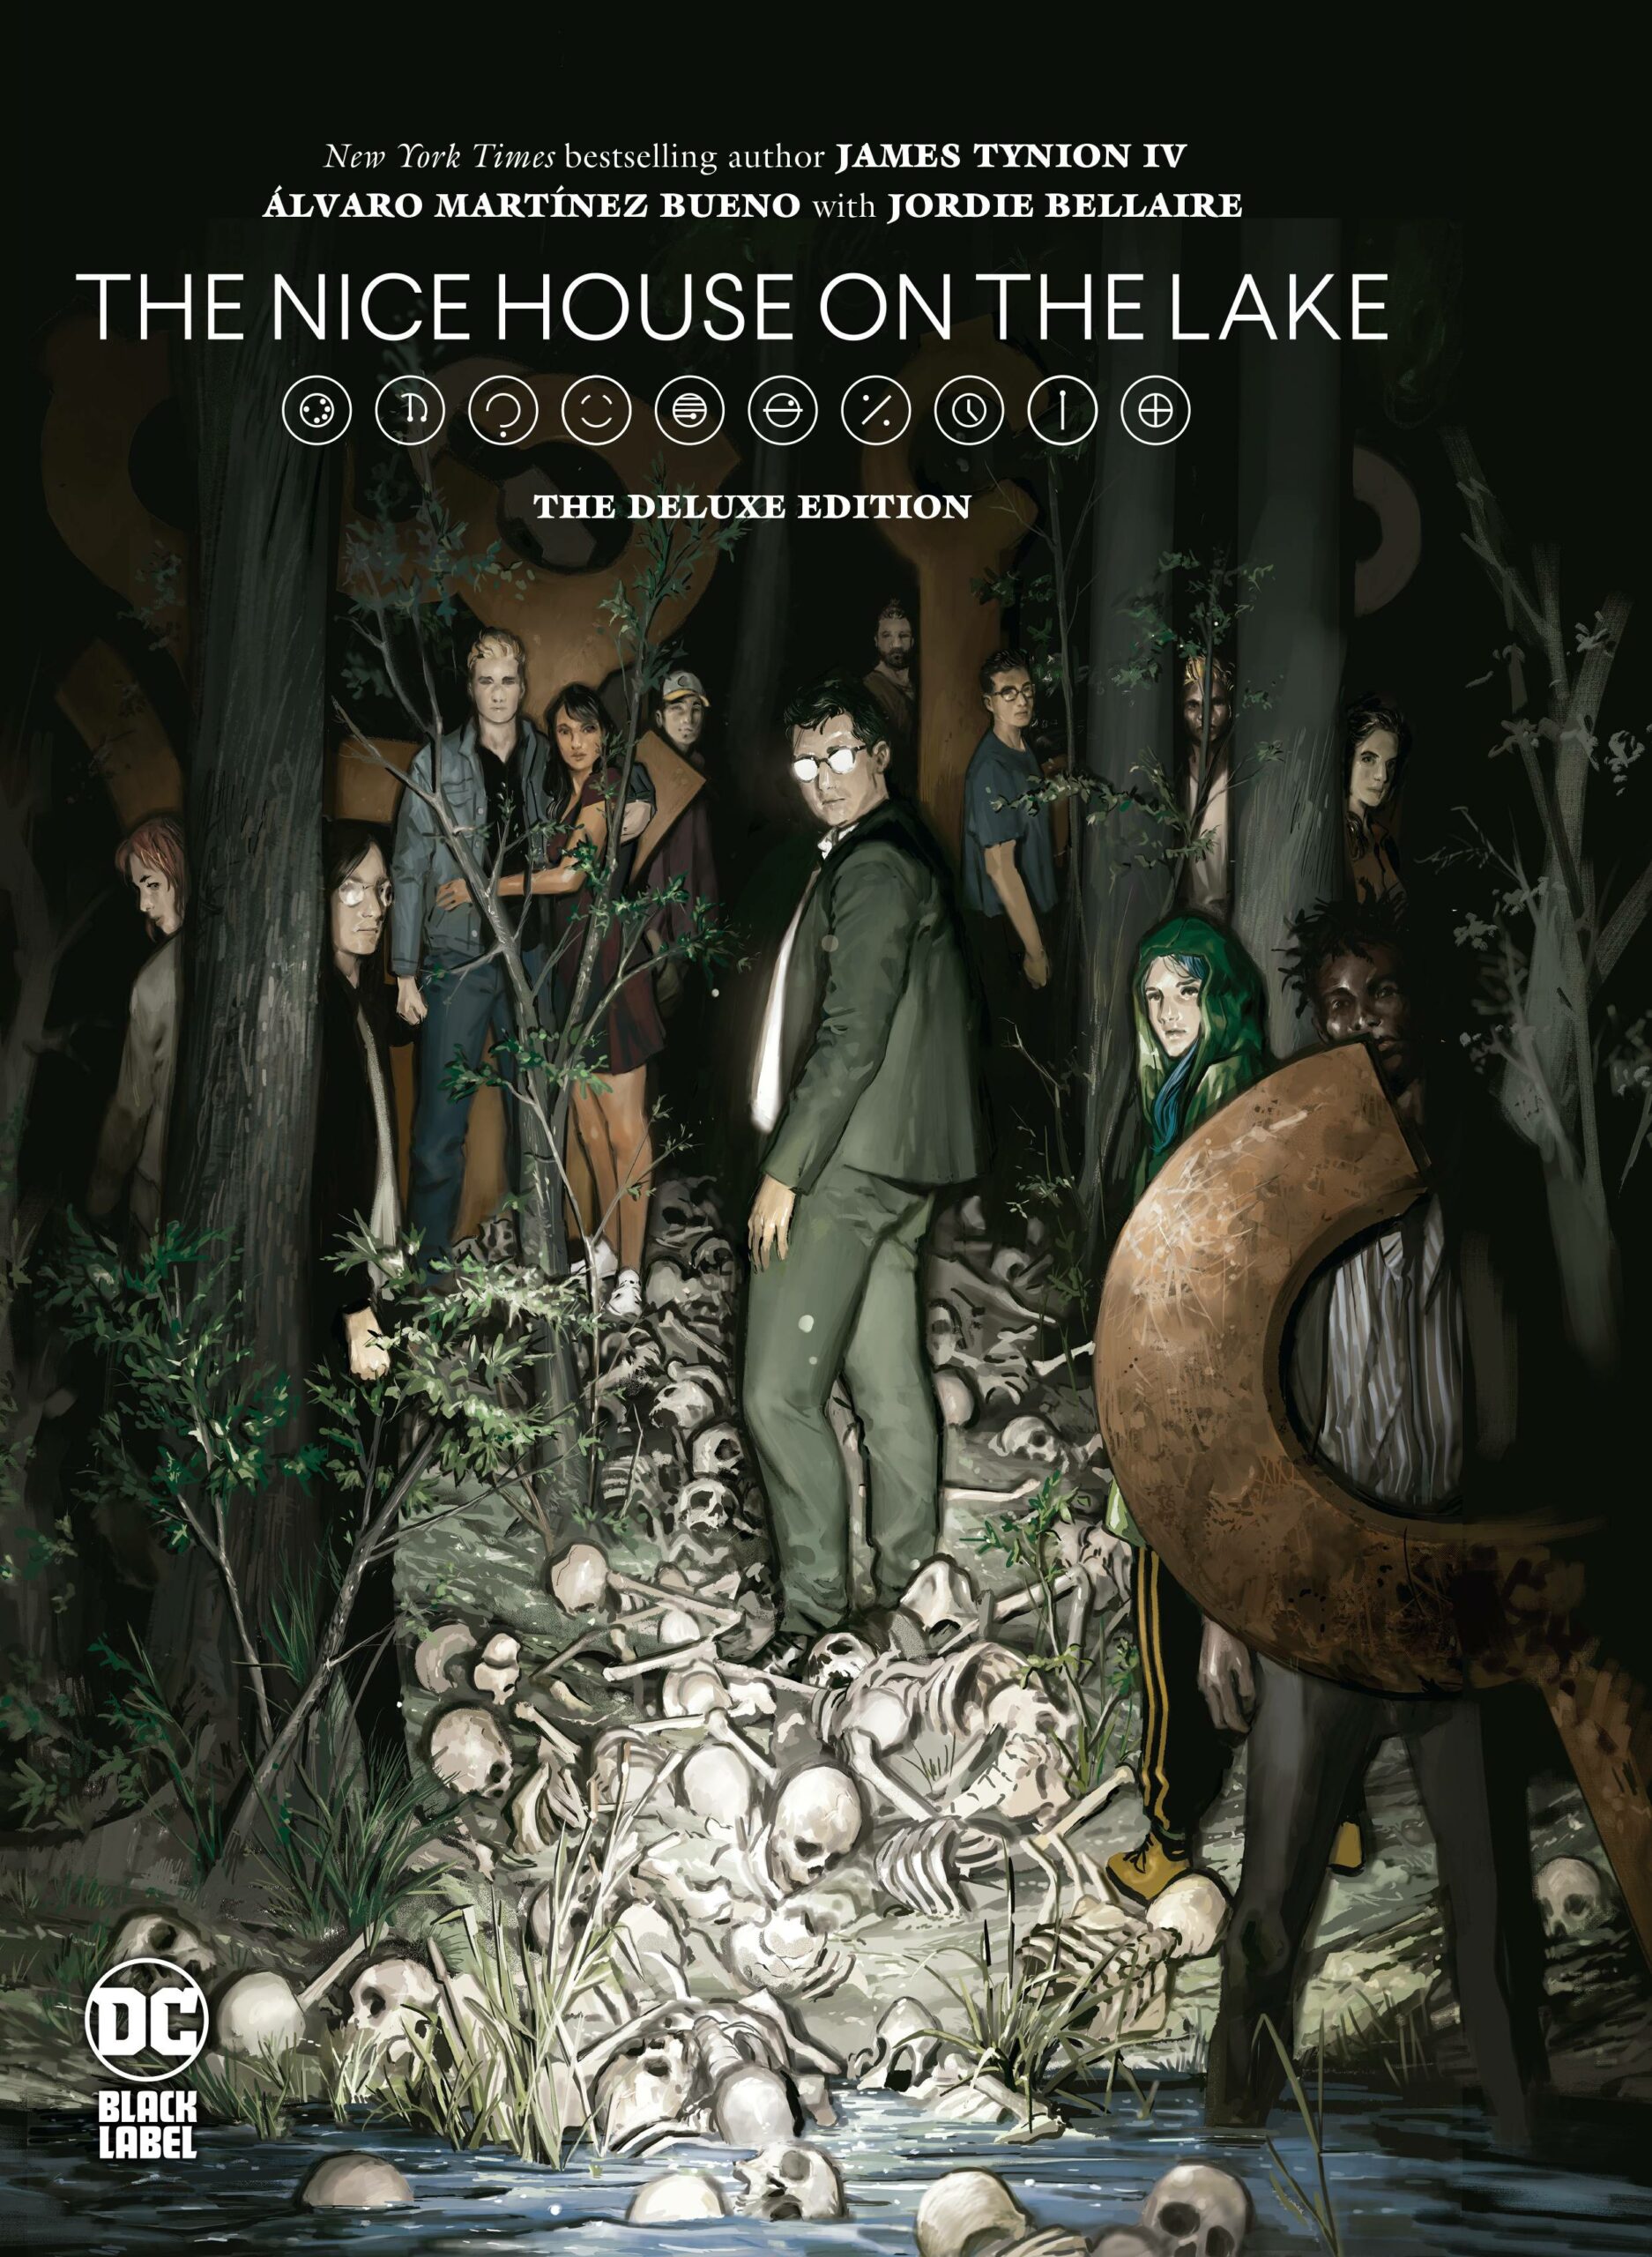 NICE HOUSE ON THE LAKE THE DELUXE EDITION HC